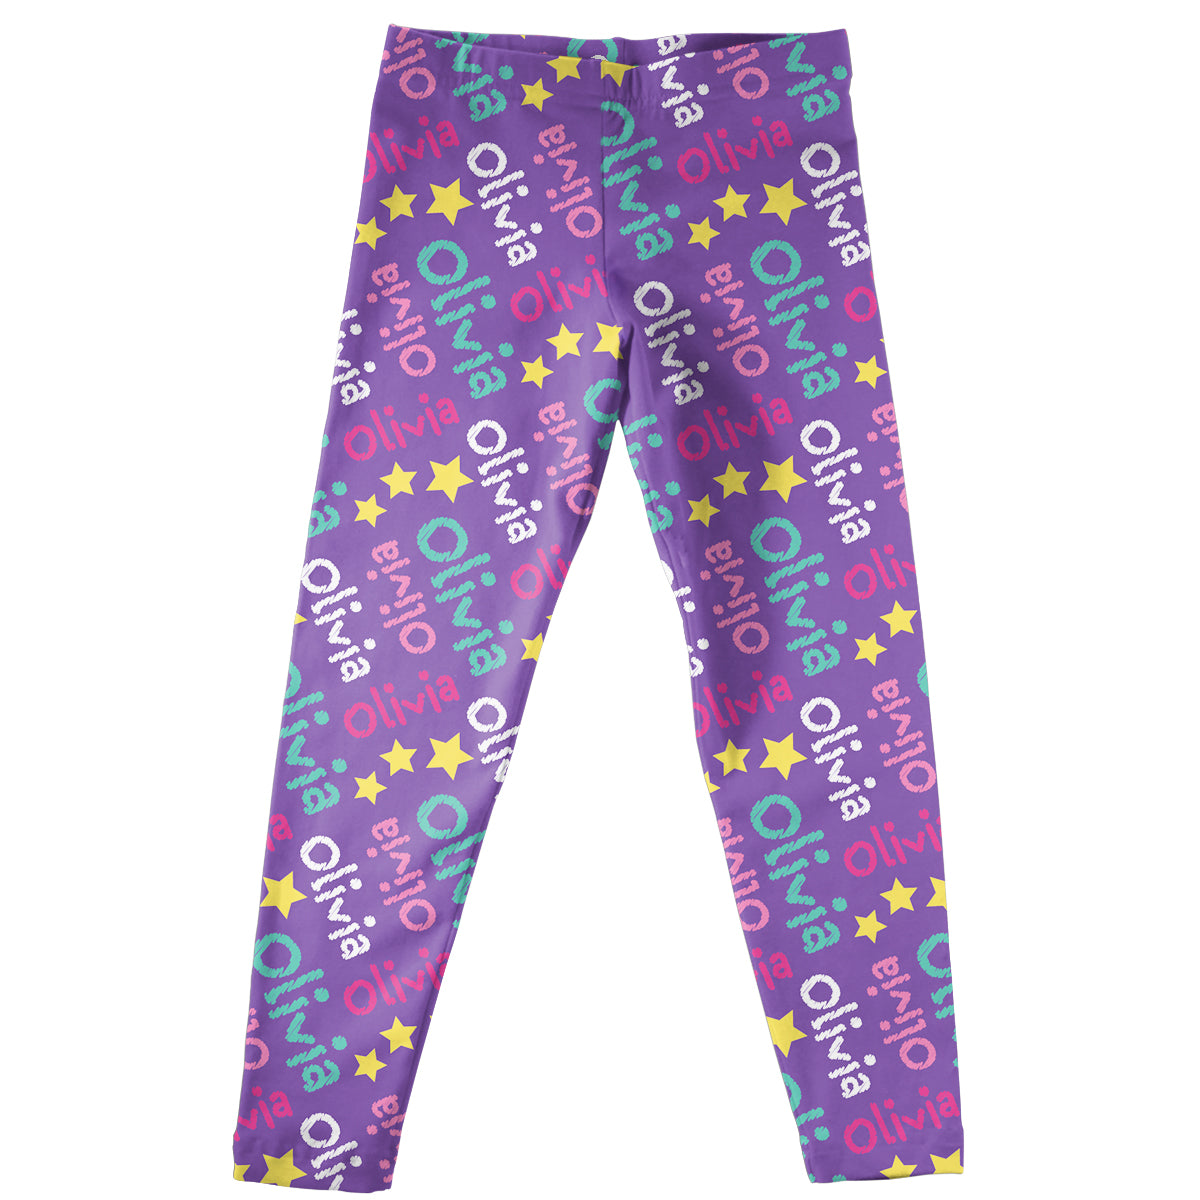 Purple leggings with stars and name - Wimziy&Co.